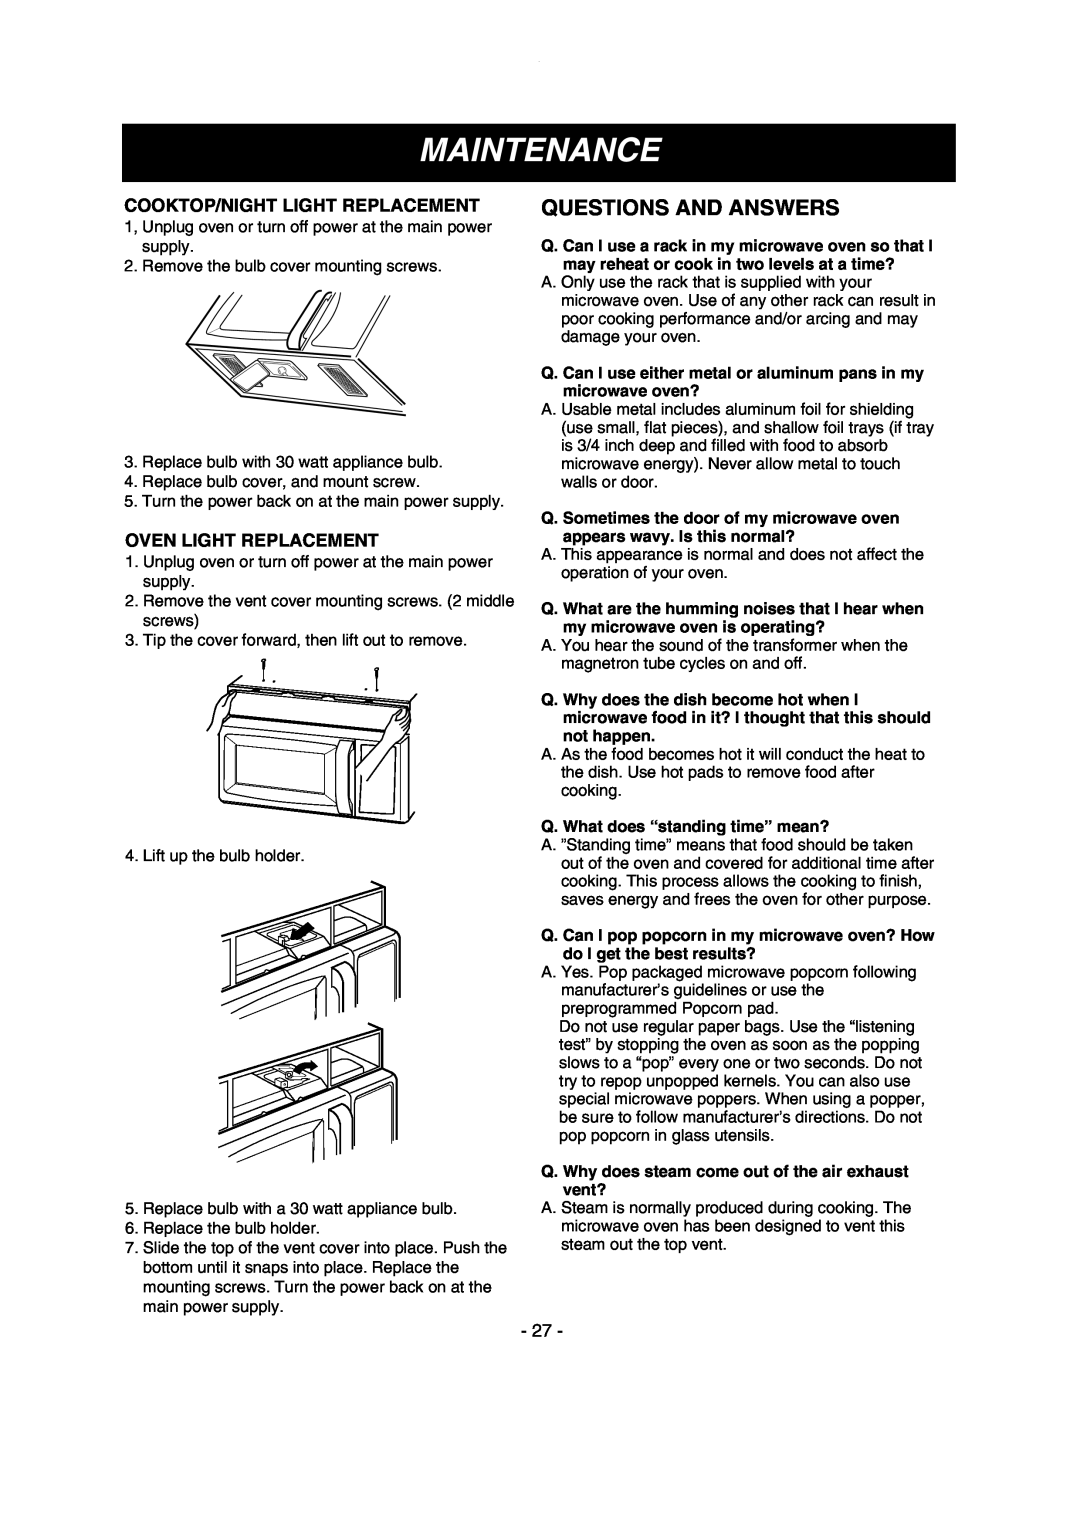 LG Electronics LMV1635SW Questions And Answers, Maintenance, Cooktop/Night Light Replacement, Oven Light Replacement 